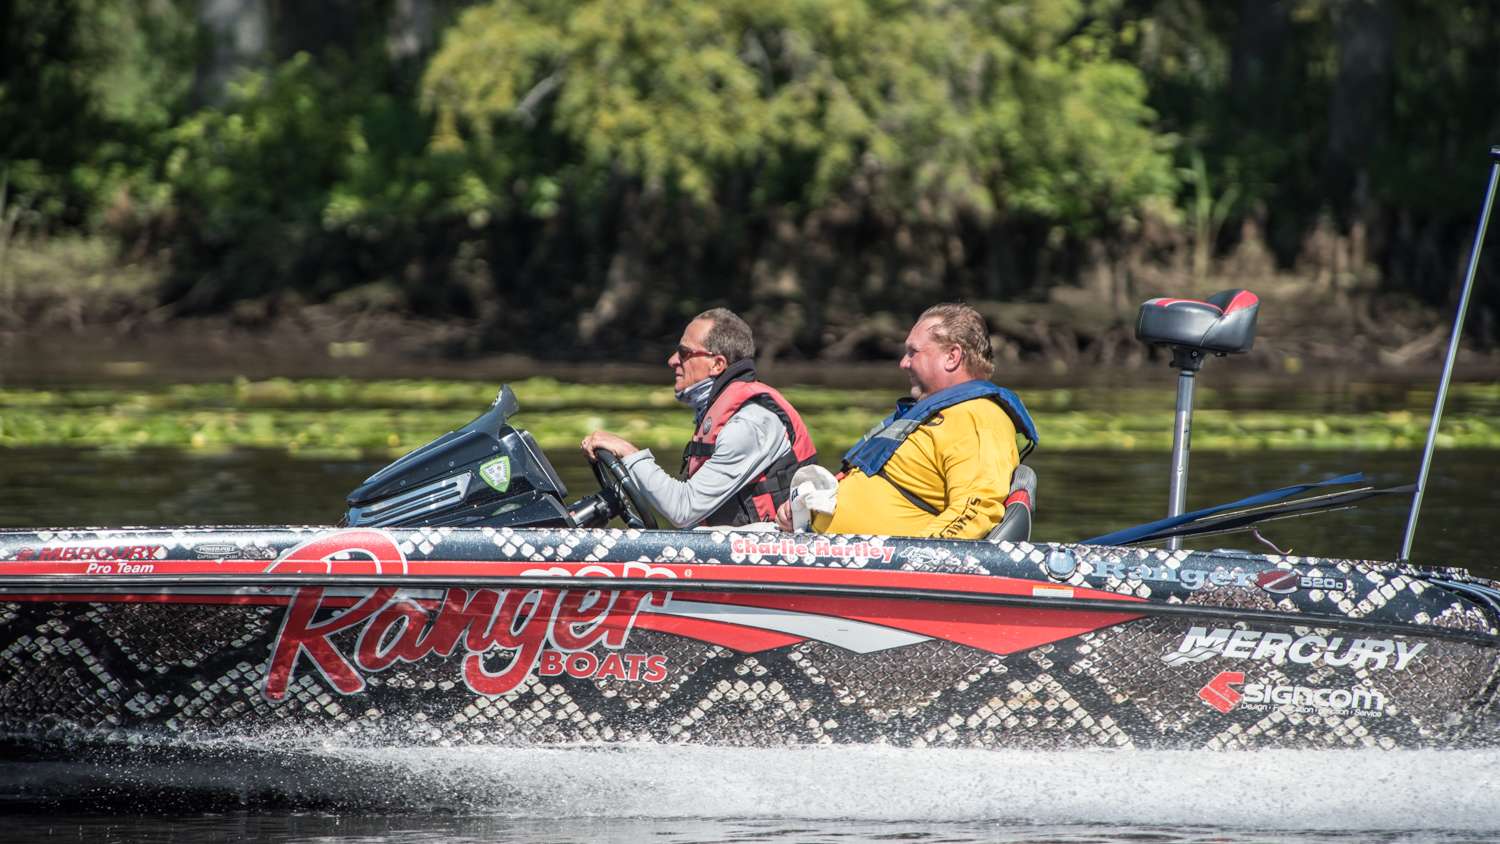 As we headed in for the weigh-in, Charlie Hartley headed to one last spot in search of a quality bite.  